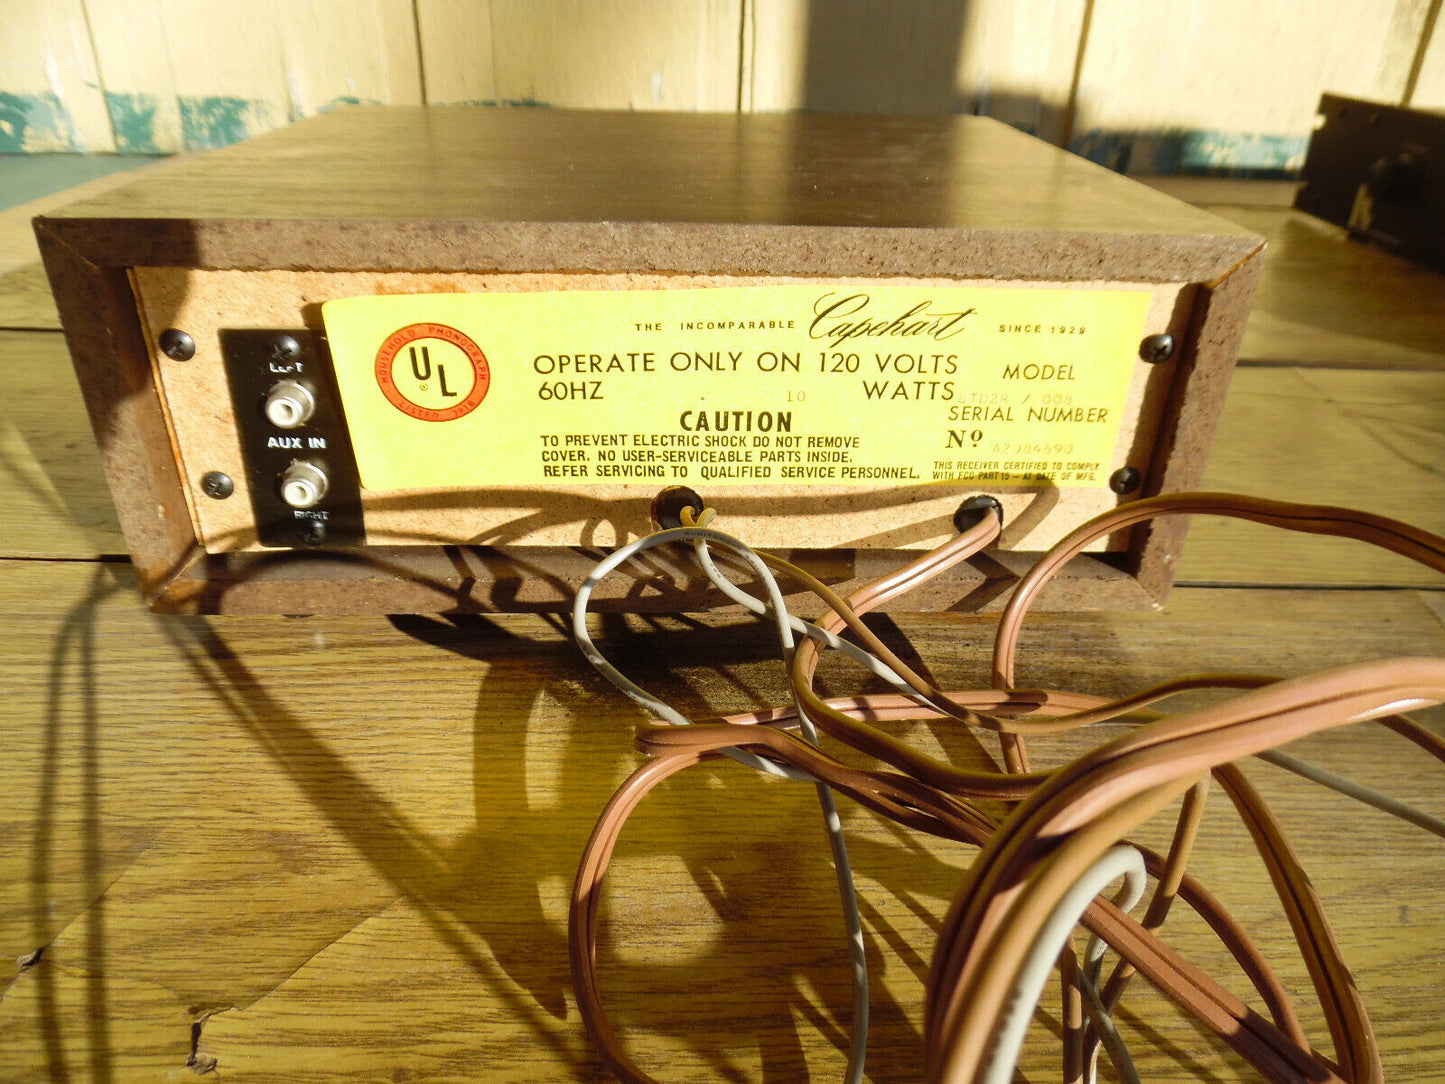 Capehart 8-Track stereo player Recorder